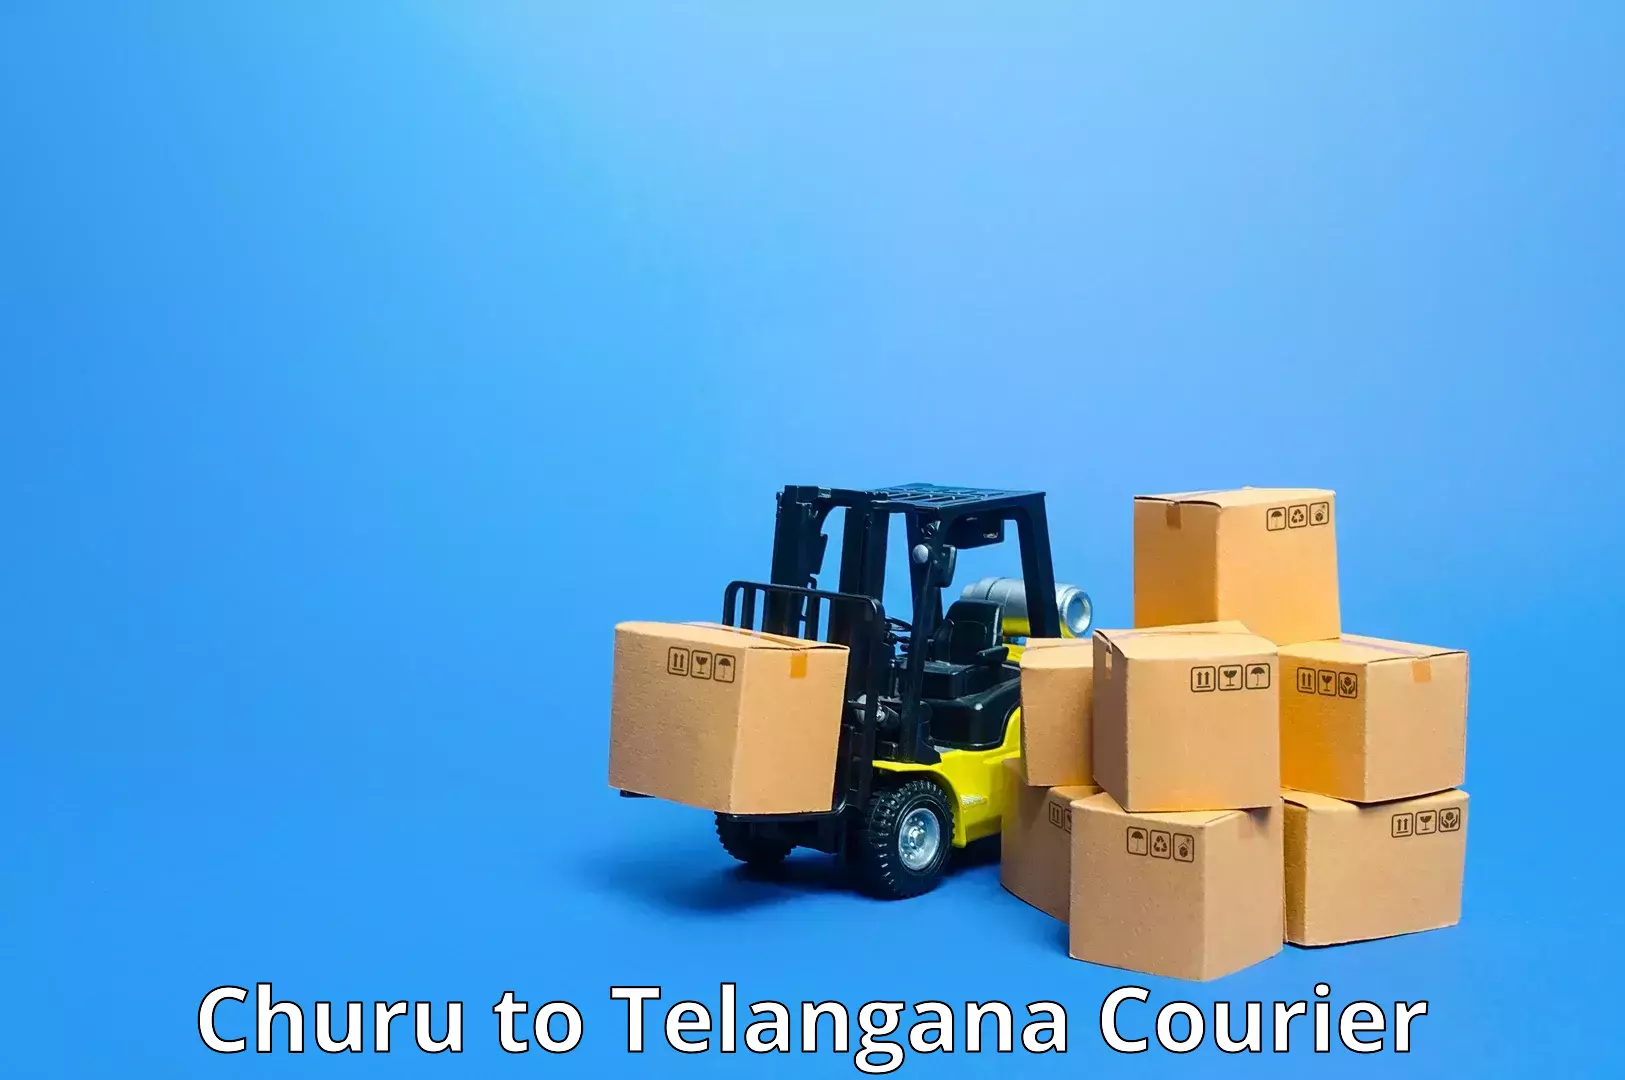 Package delivery network Churu to Ramagundam